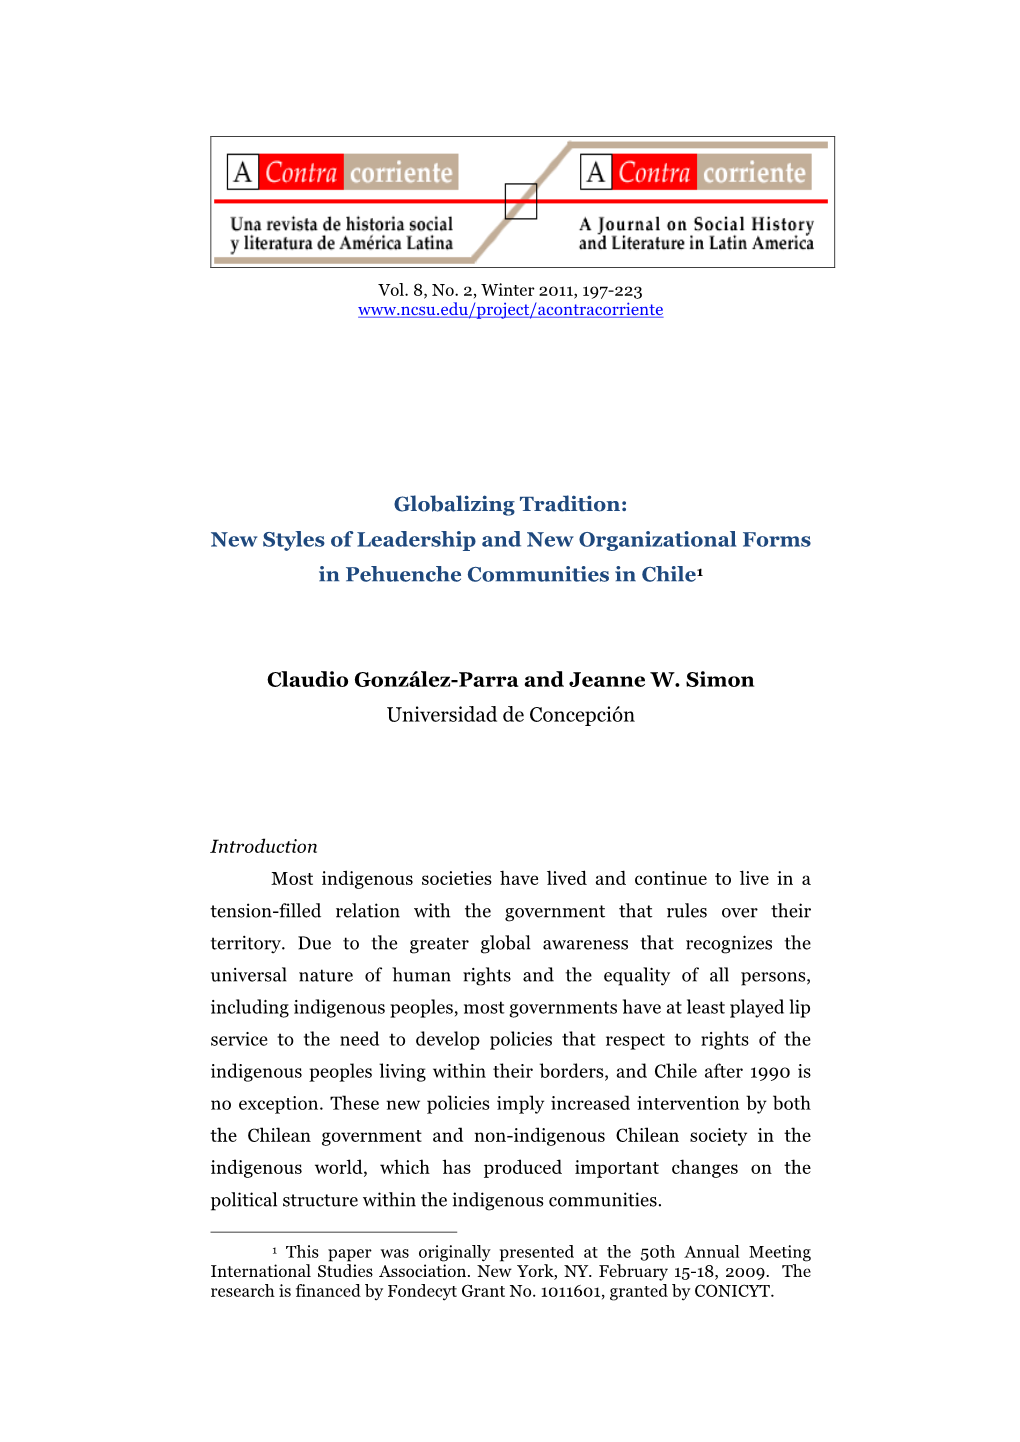 Globalizing Tradition: New Styles of Leadership and New Organizational Forms in Pehuenche Communities in Chile1